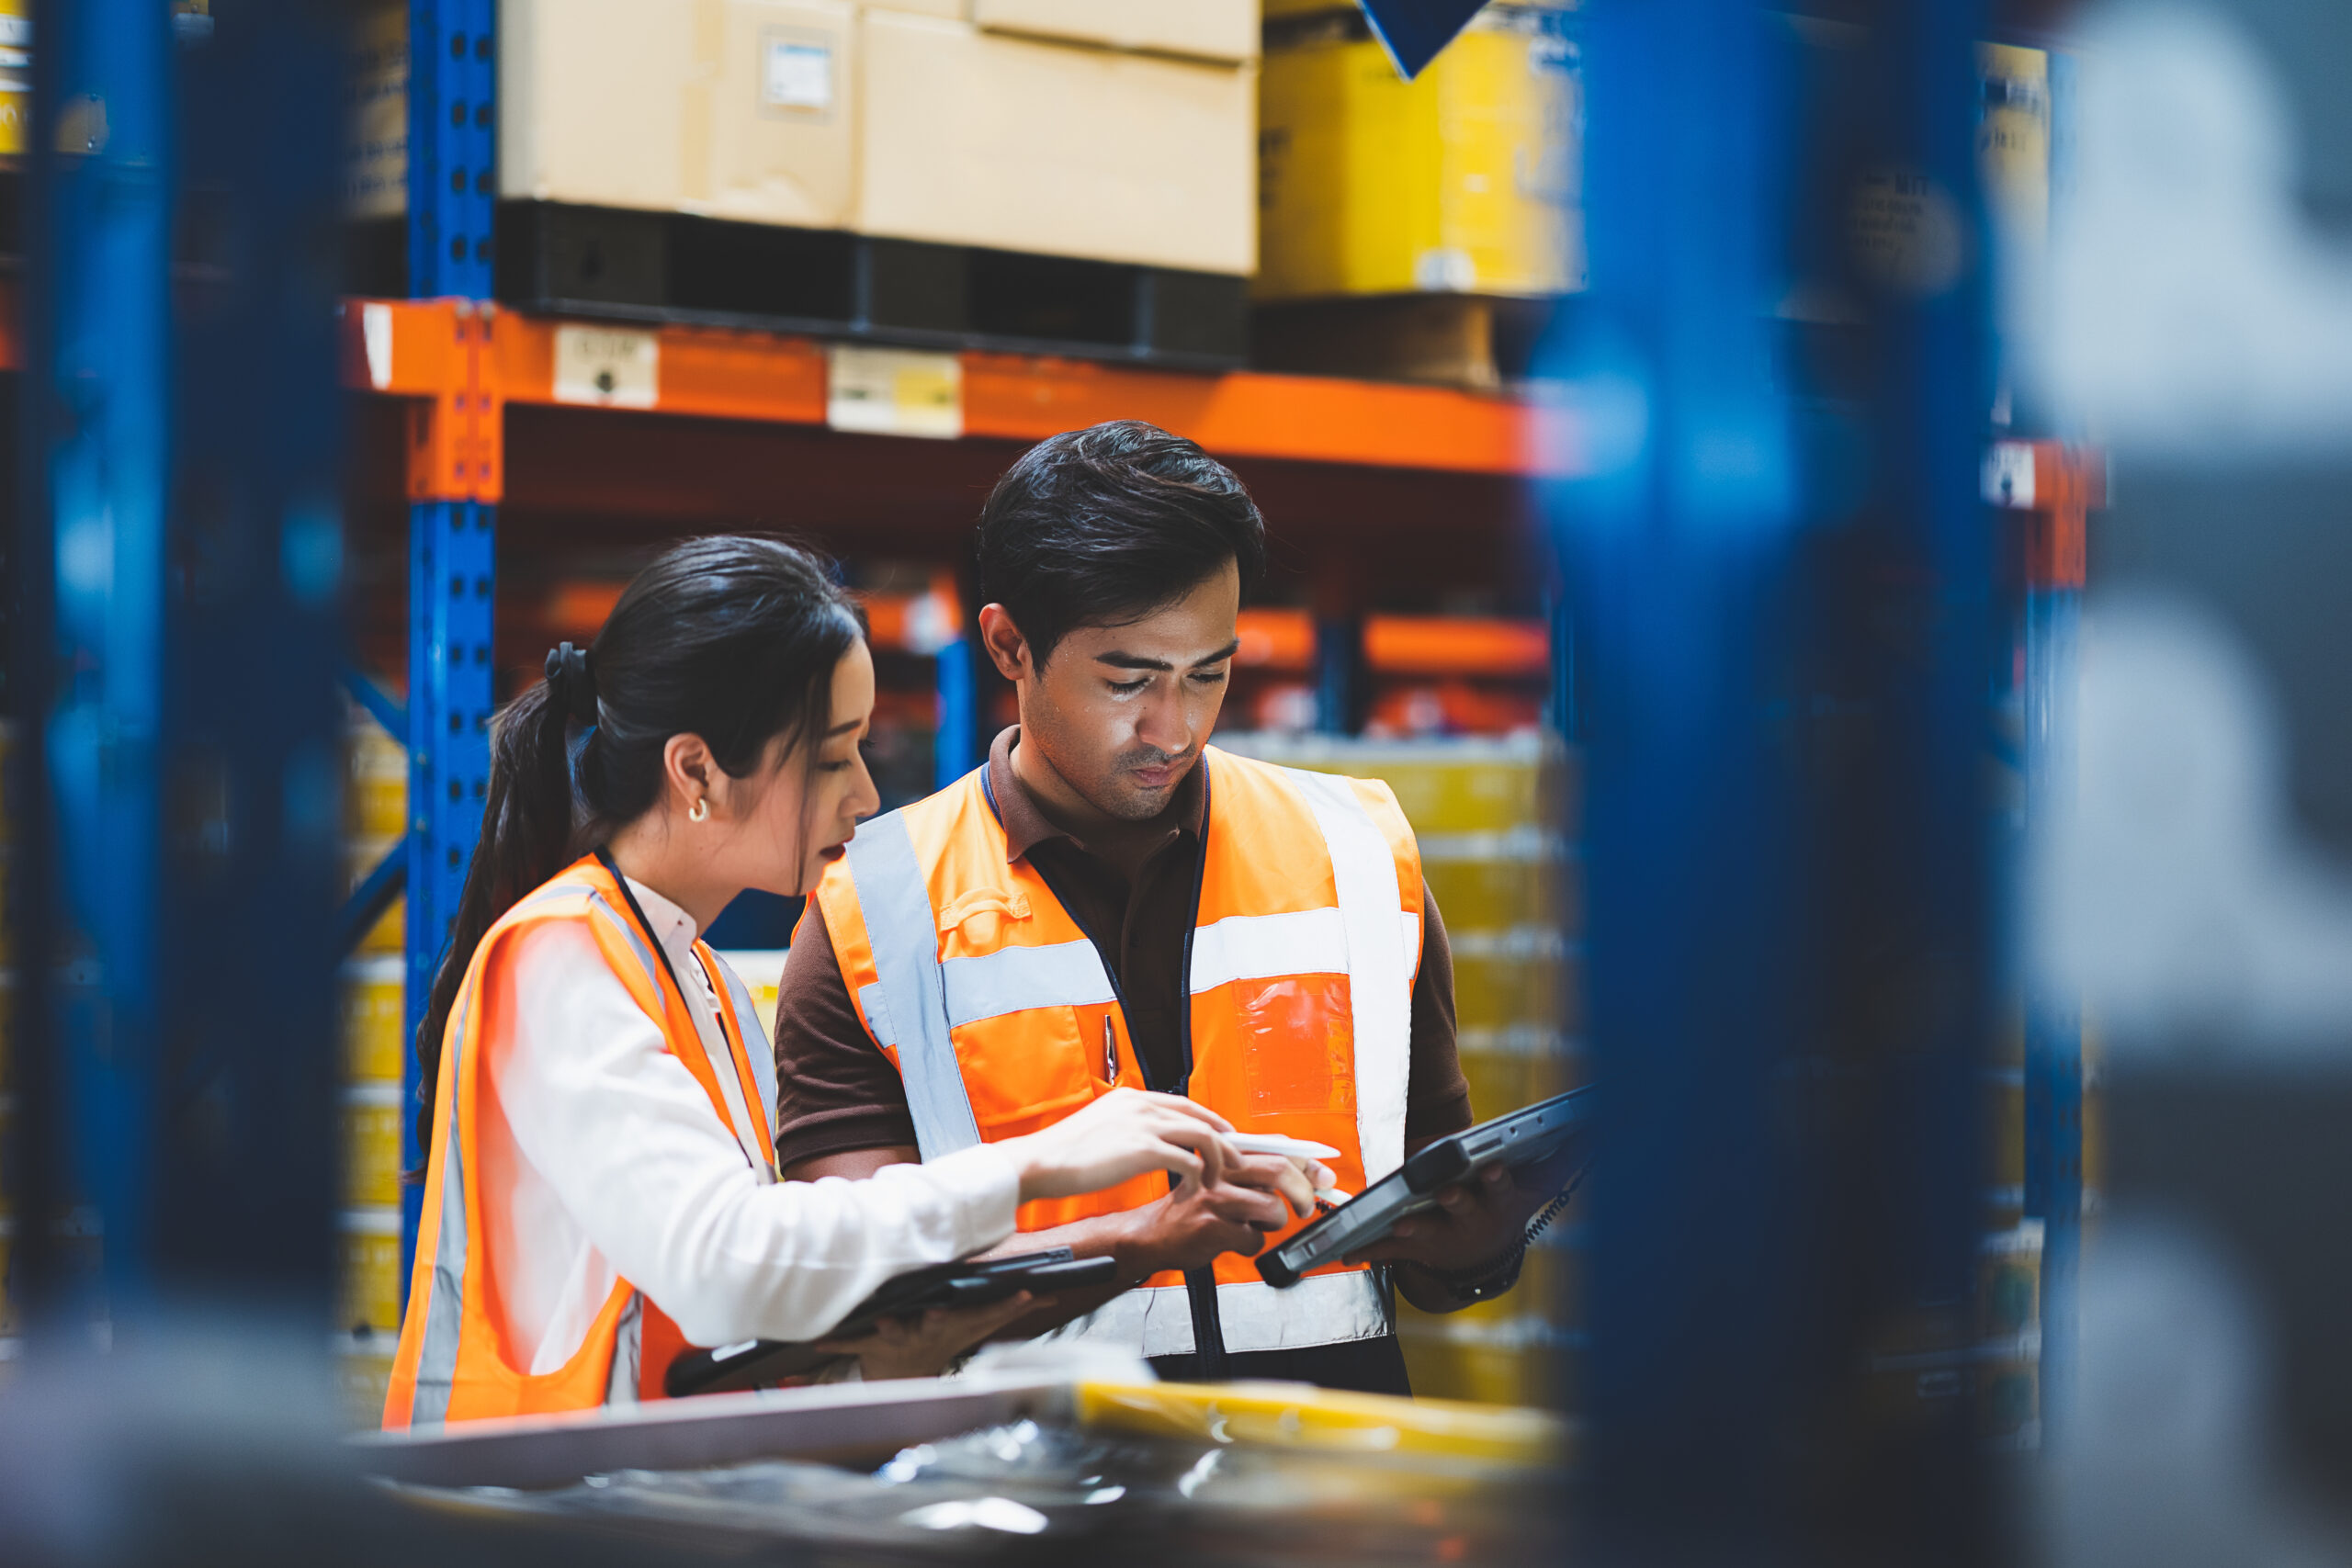 warehouse worker and manager checks stock and inventory using a tablet device
